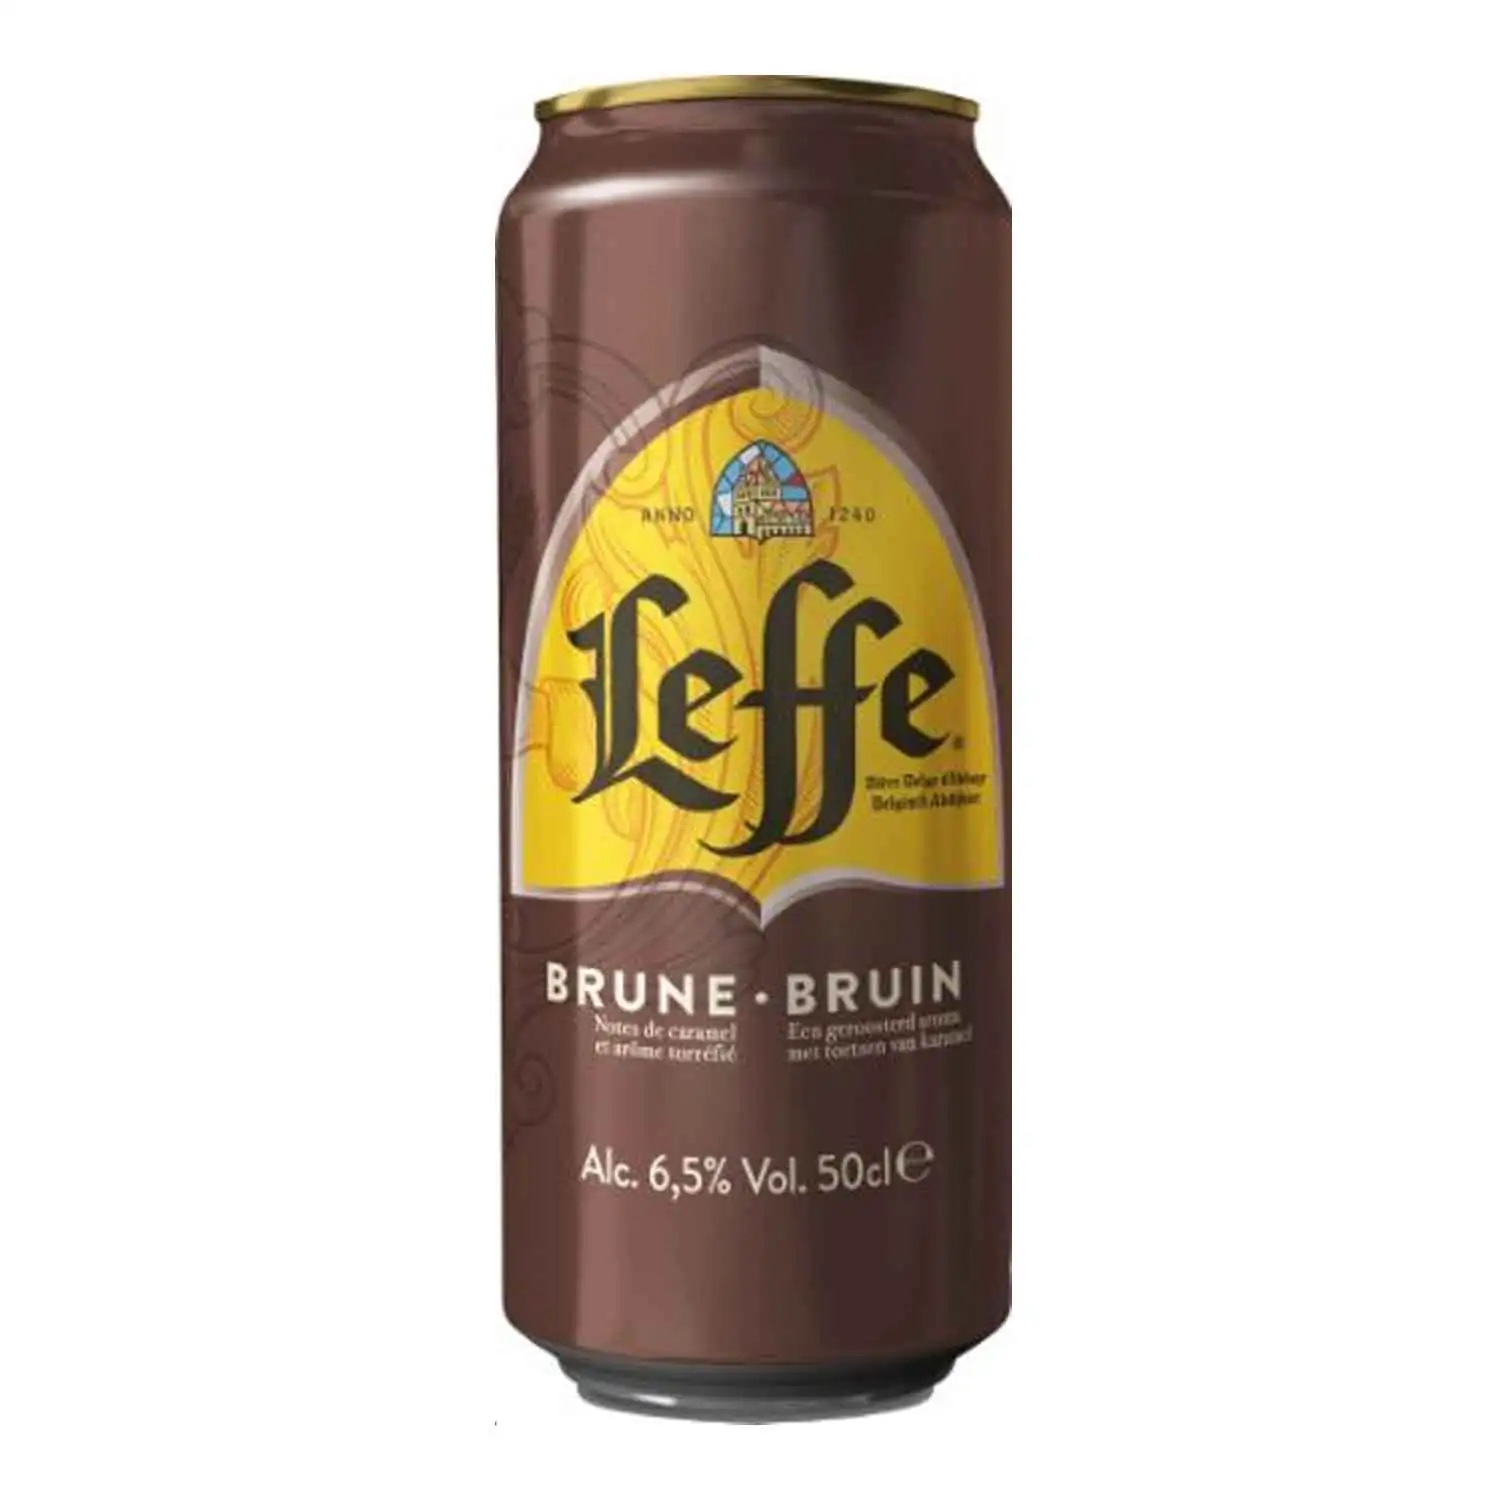 Leffe brune 50cl Alc 6,5% - Buy at Real Tobacco